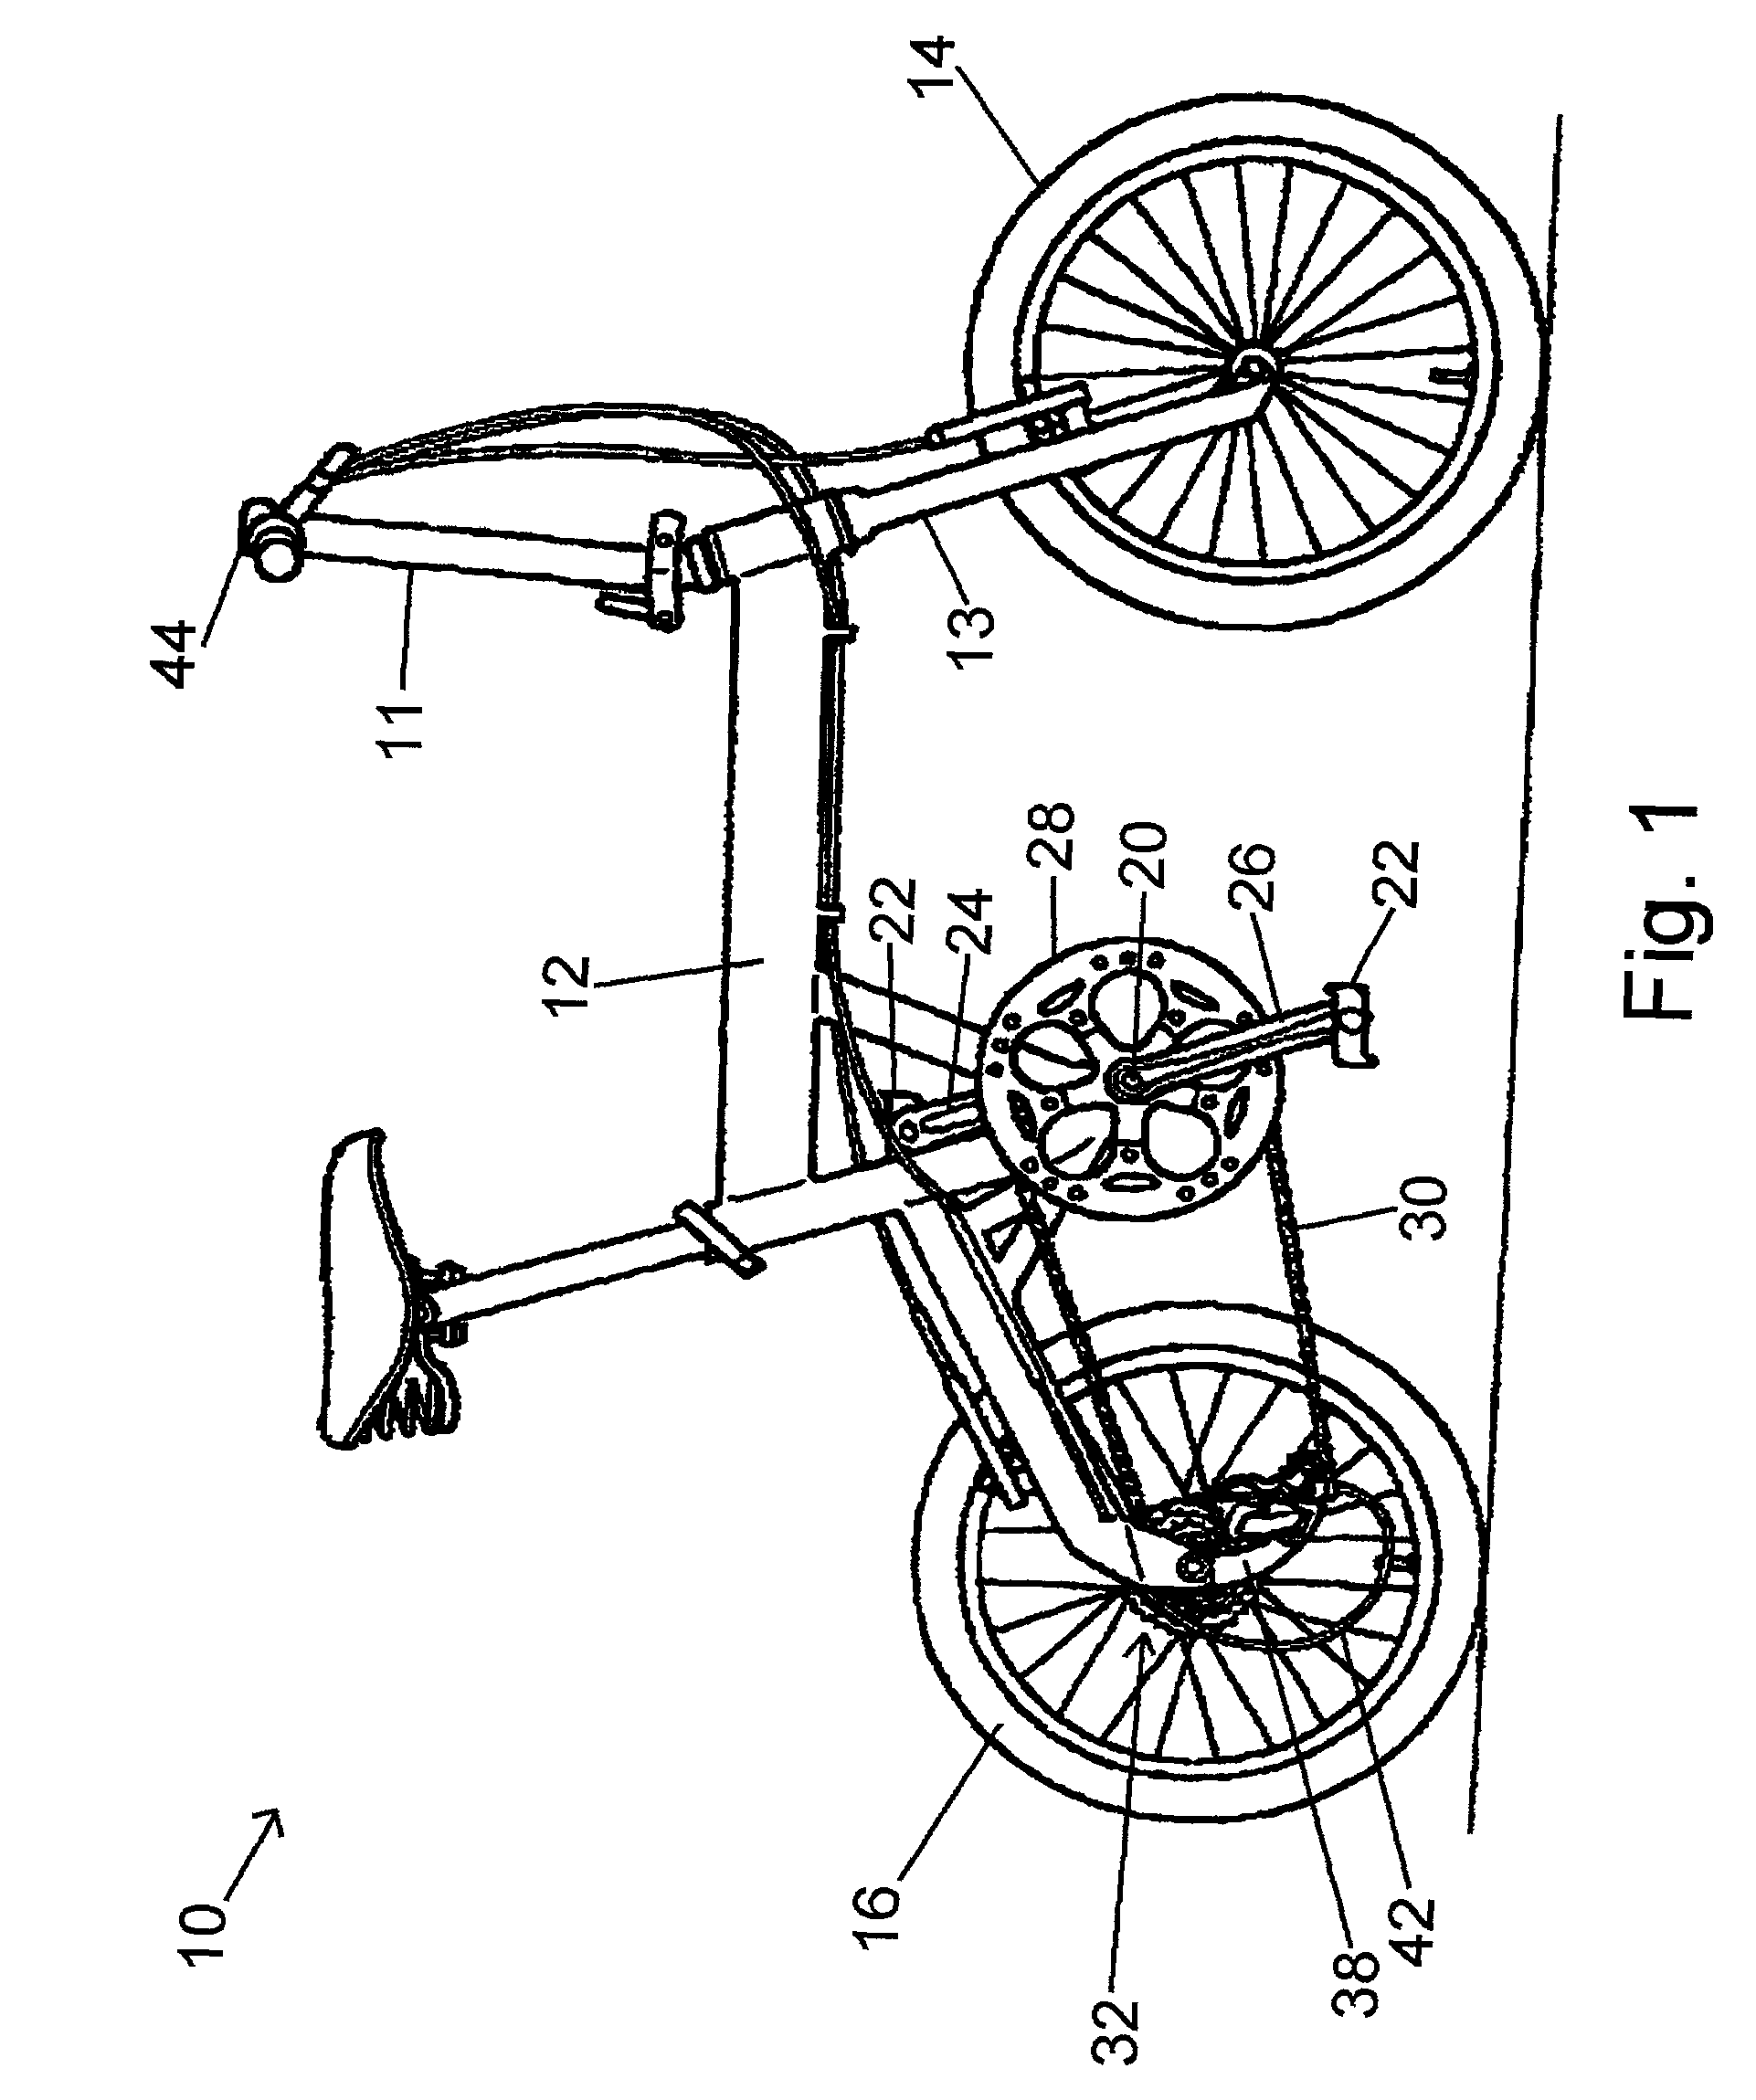 Sprocket assembly for a bicycle